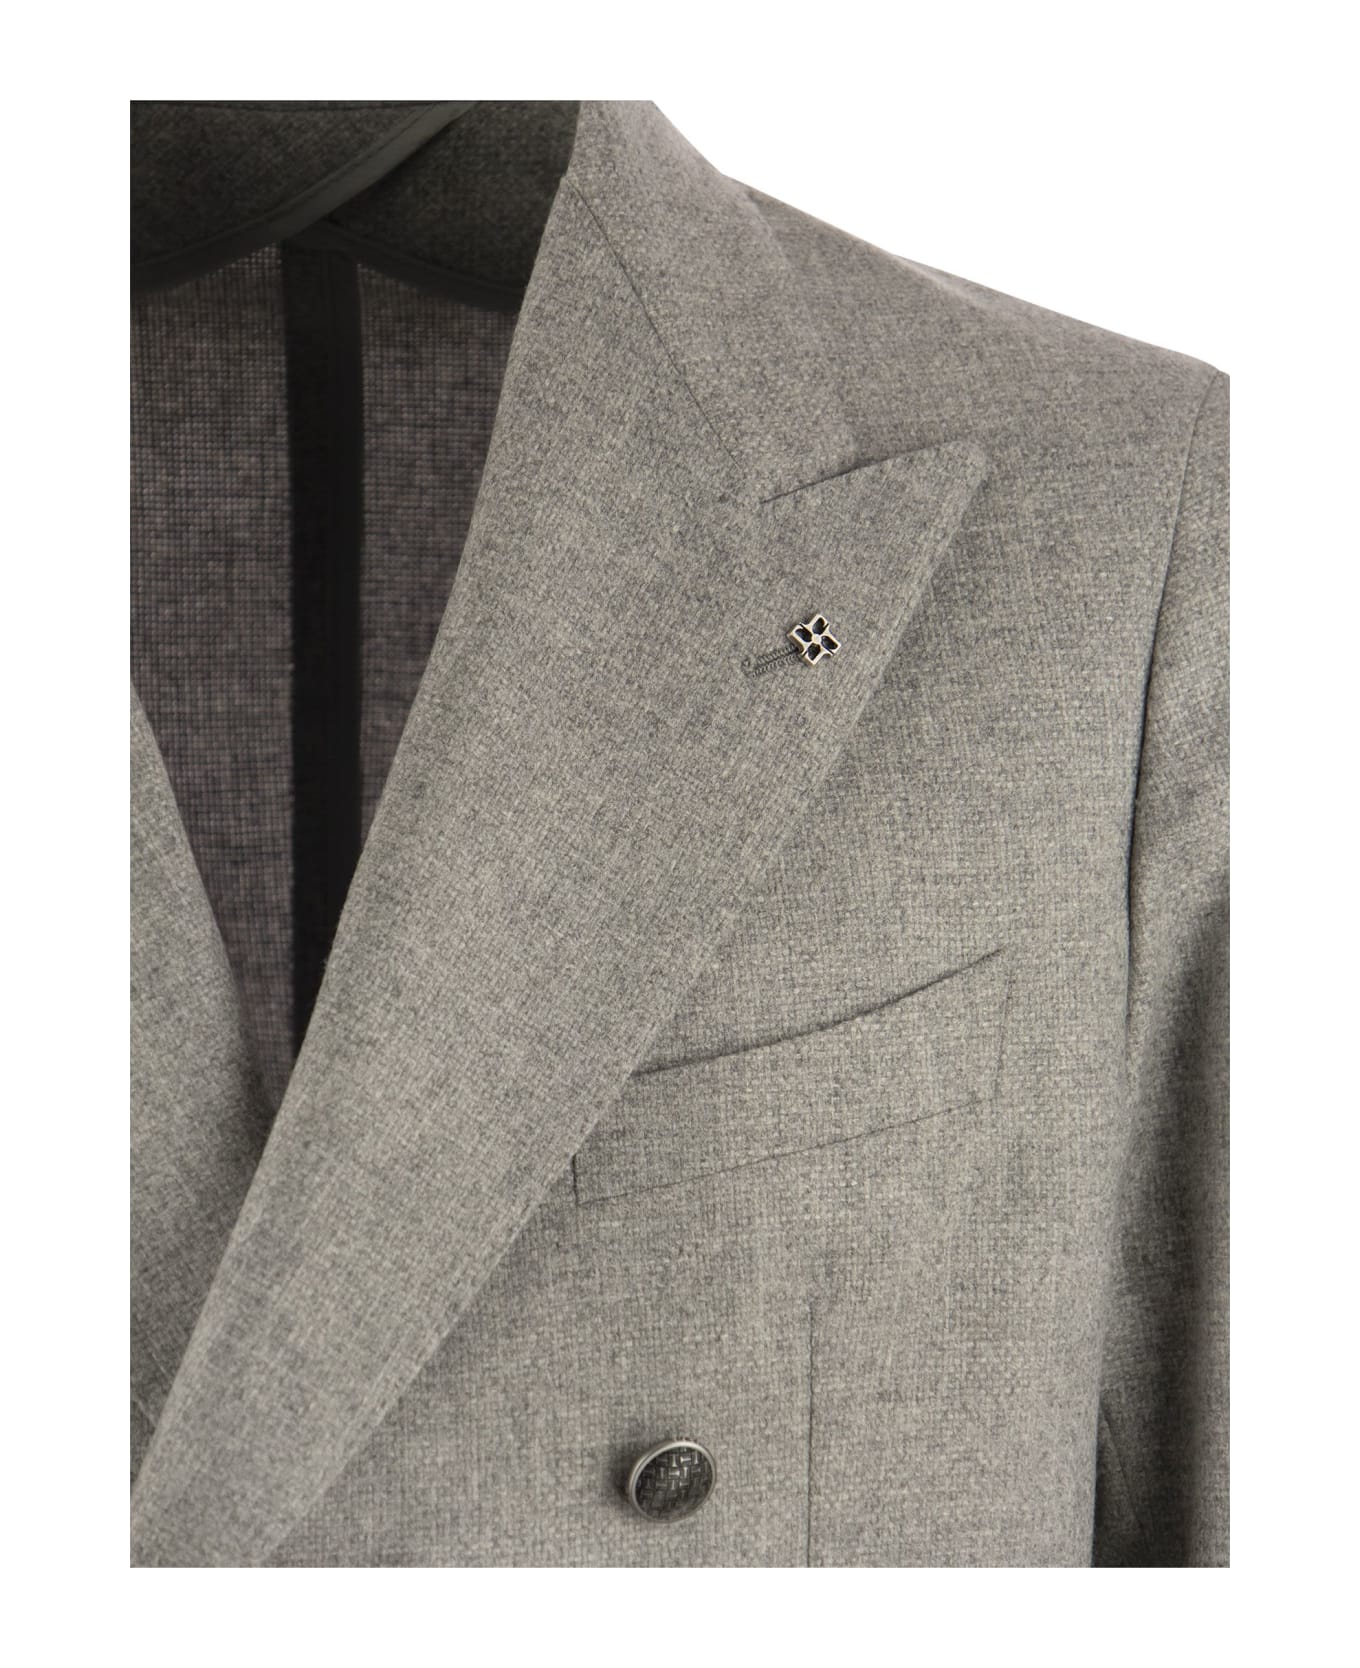 Tagliatore Montecarlo - Double-breasted Wool And Cashmere Jacket - Pearl コート